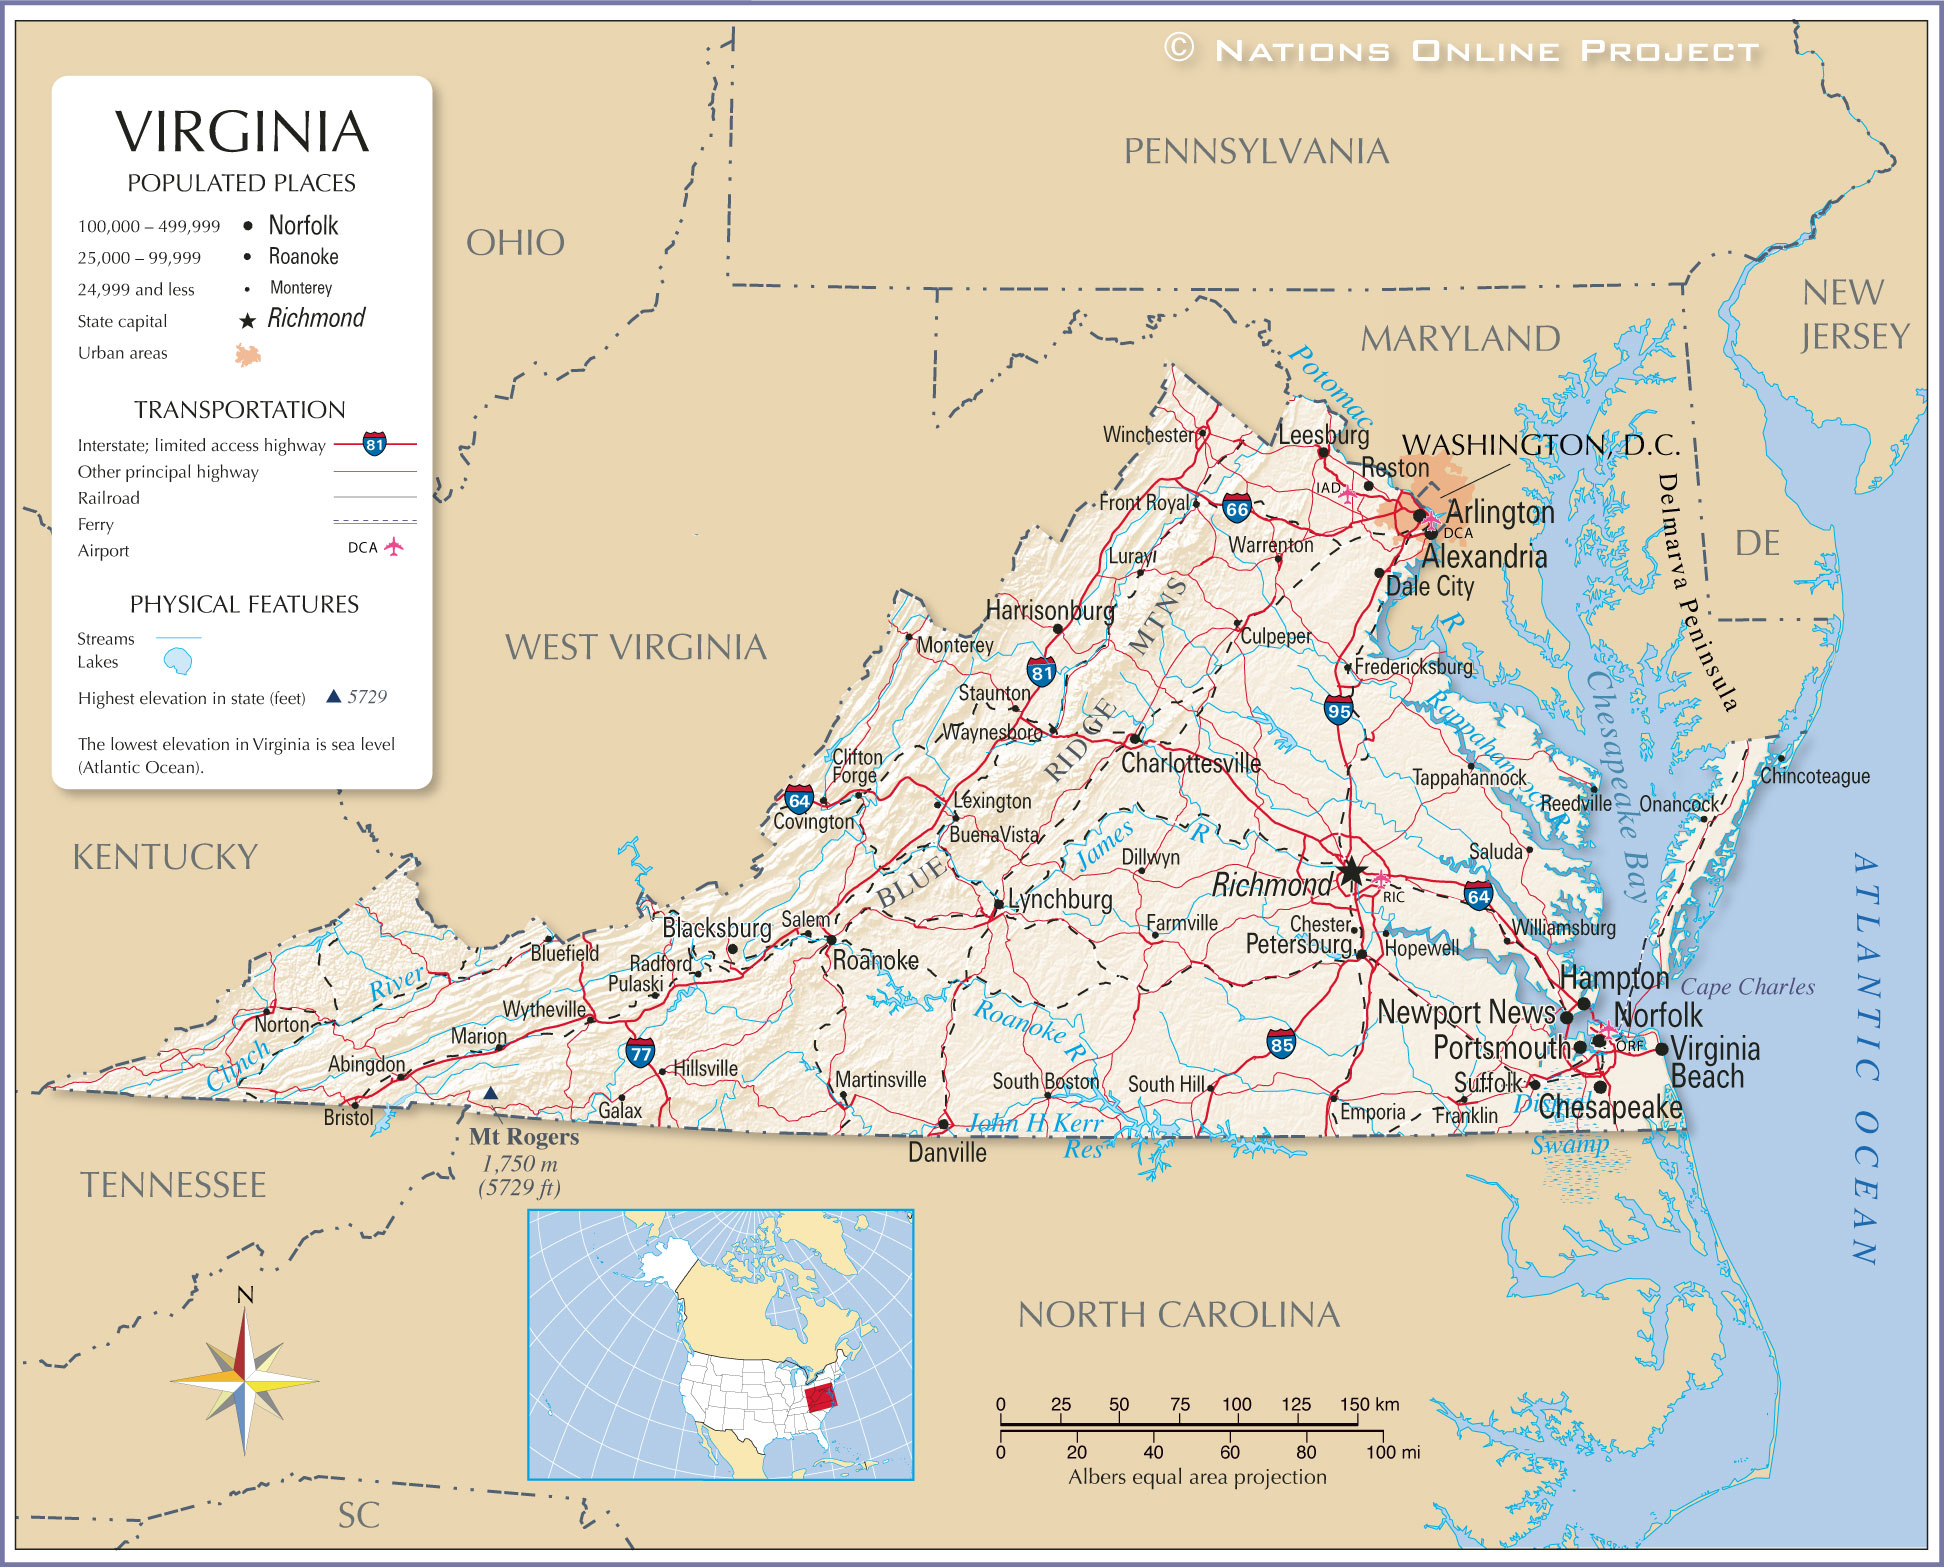 Reference Map of Virginia